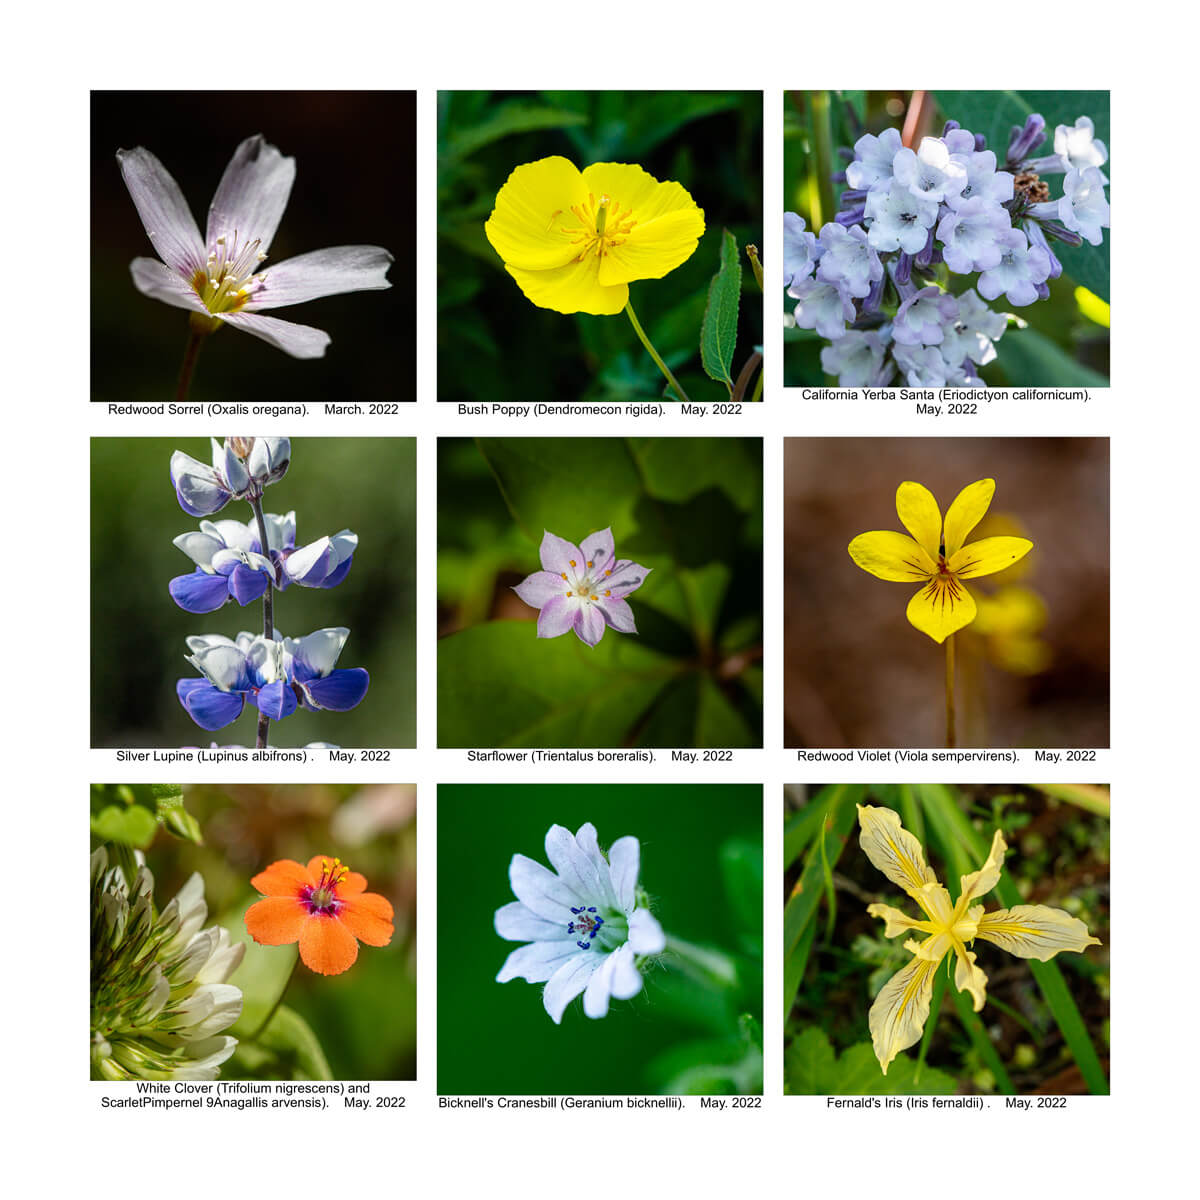 A grid of 9 squares show wildflowers found in 2021: redwood sorrel, bush poppy, California yerba santa, silver lupine, starflower, redwood violet, white clover and scarlet pimpernel, Bicknell’s cranesbill, and Fernald’s iris, by Ian Bornarth